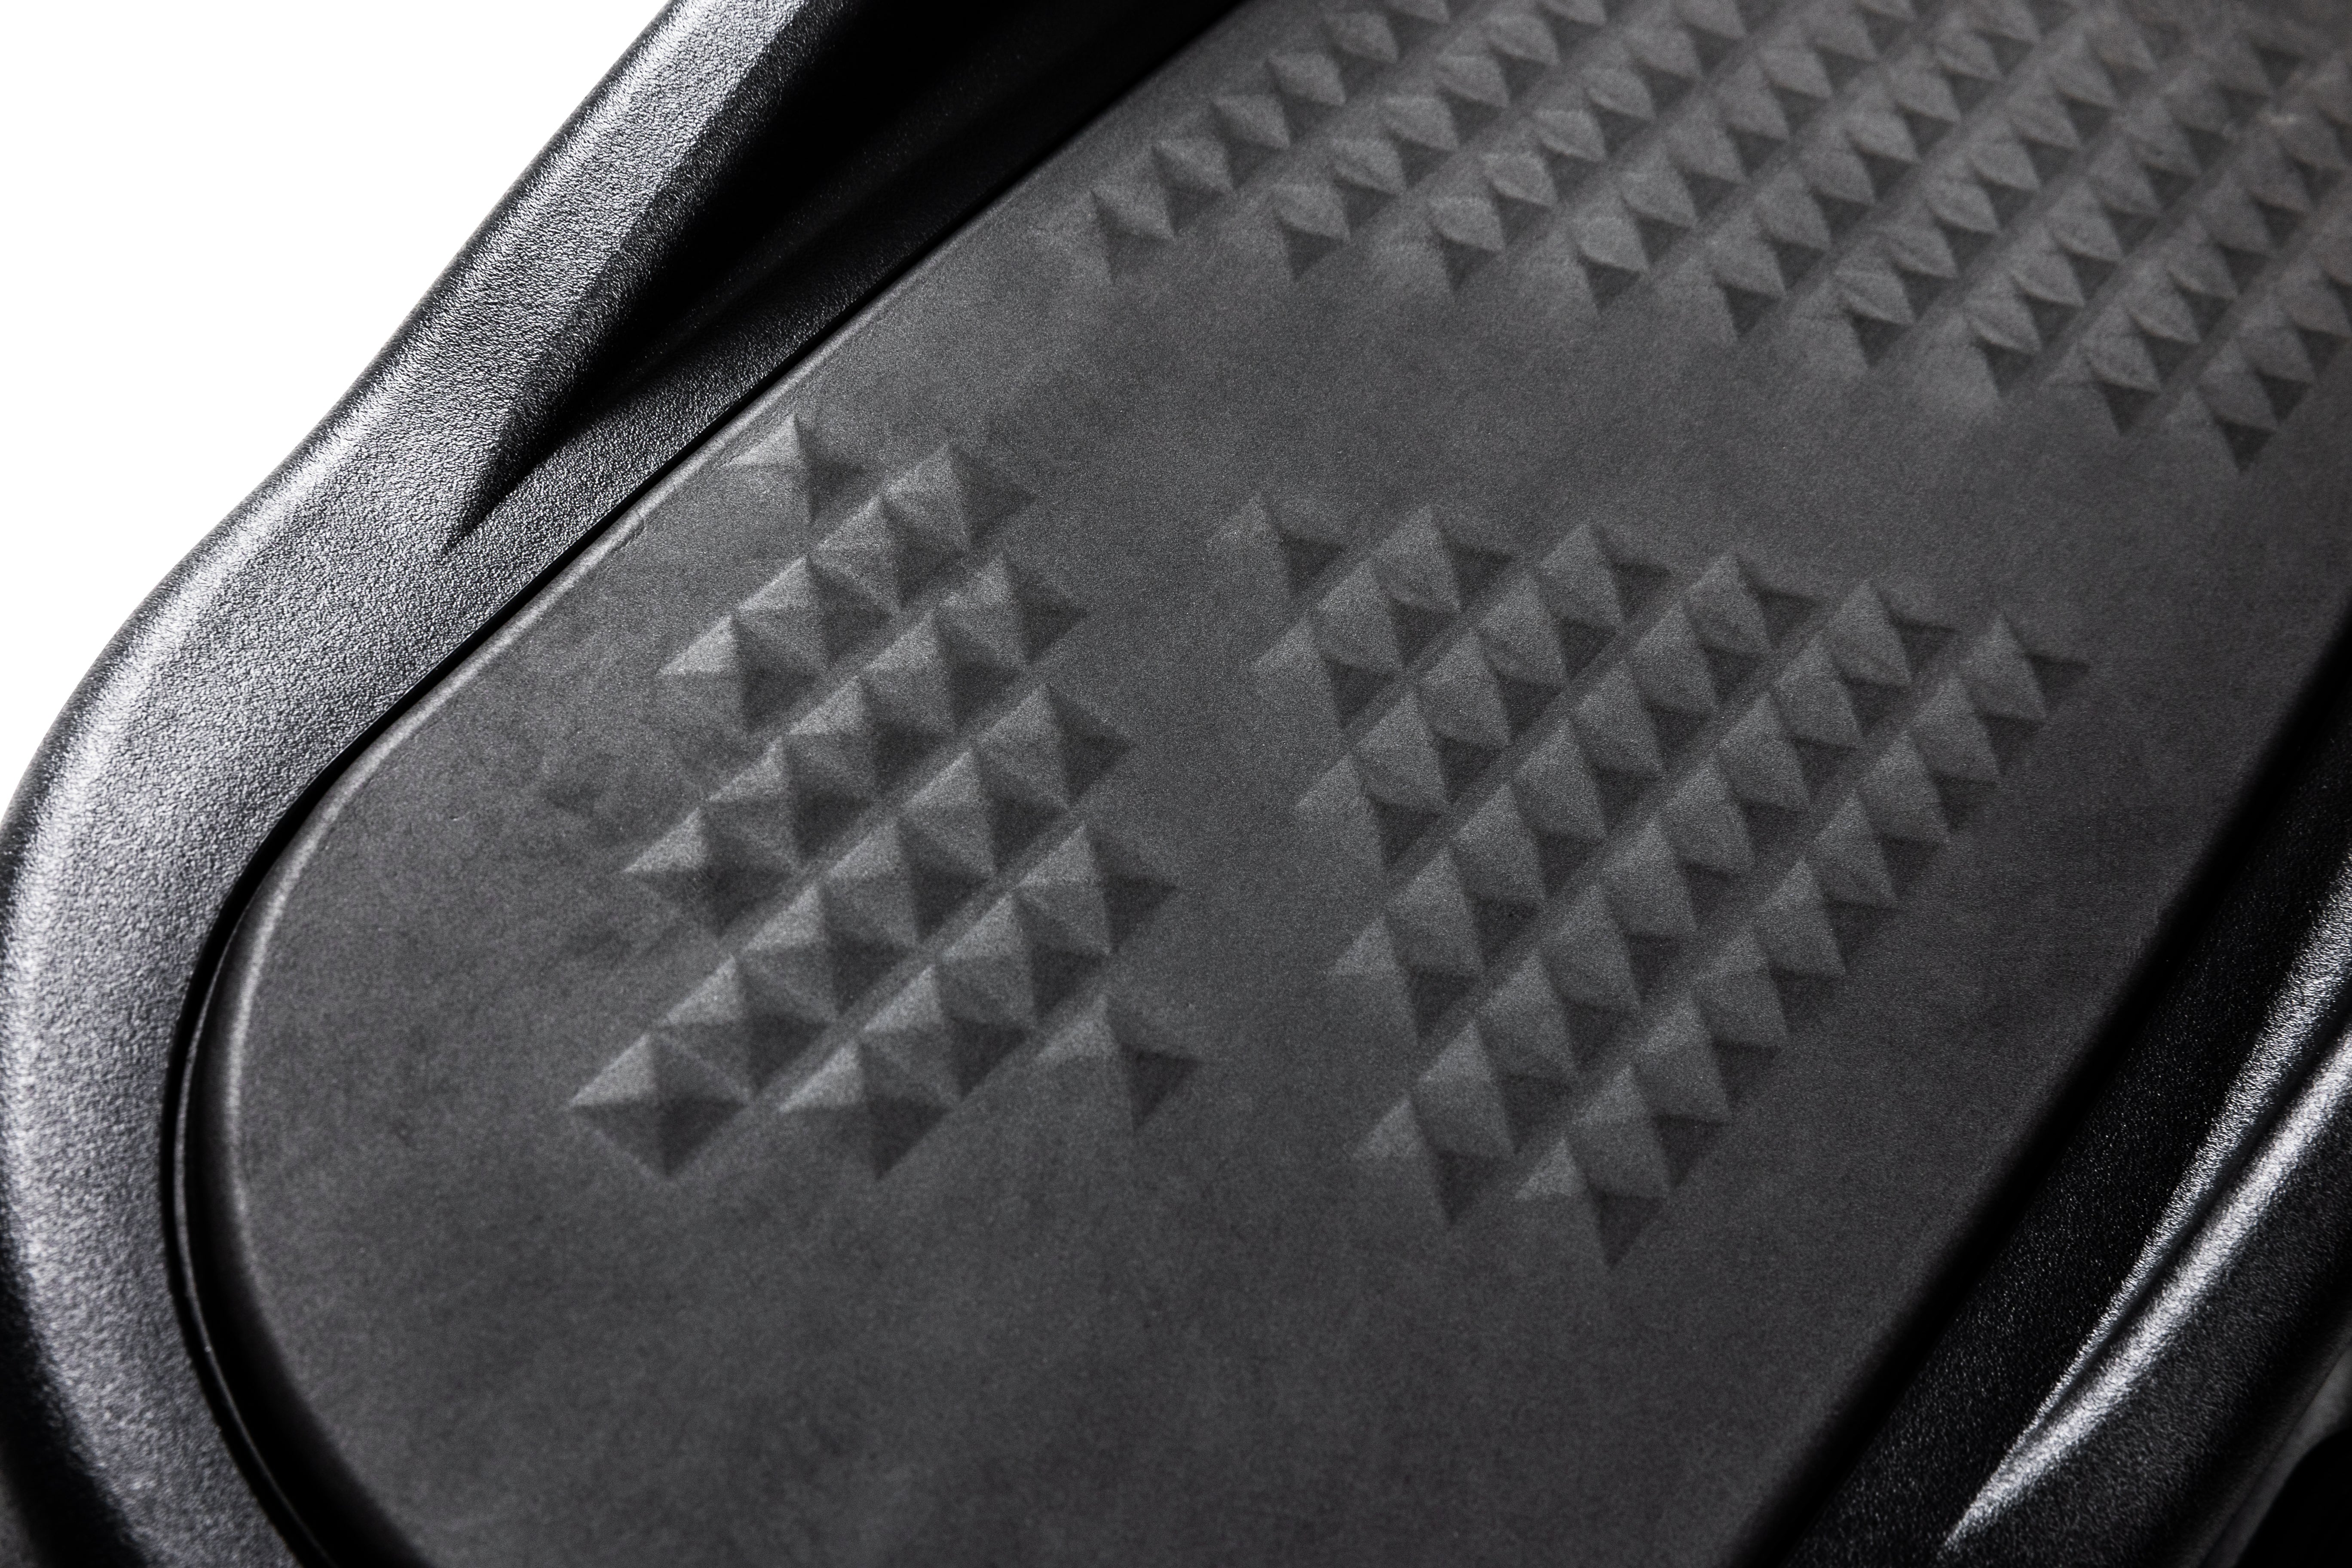 Close-up of the textured pattern on the foot pedal of the Sole E35 elliptical trainer with its smooth edge detailing